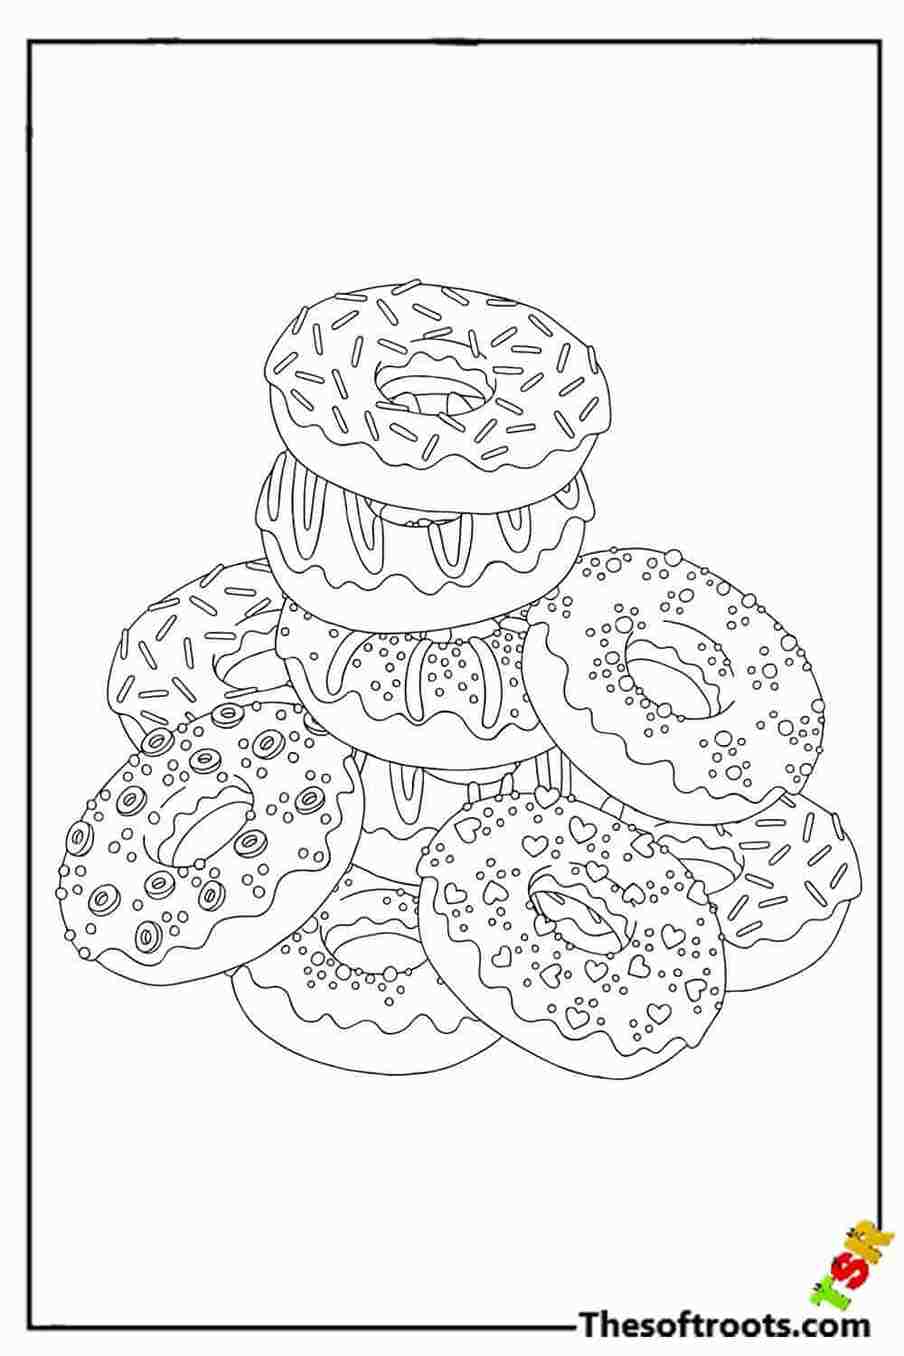 Adult Donut coloring pages